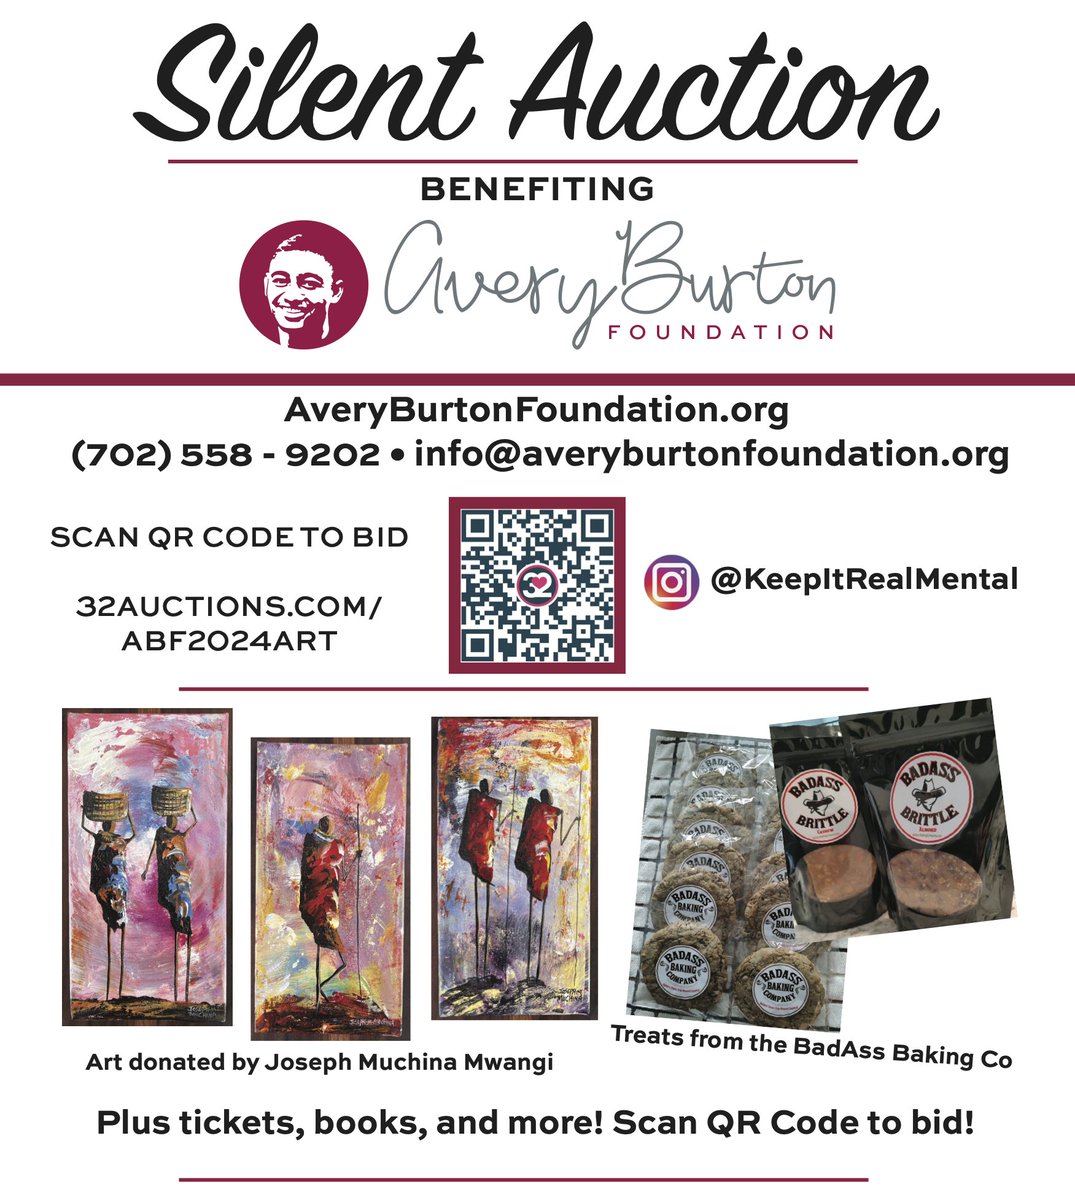 Discover the beauty of African artistry and support a meaningful cause at our Silent Auction starting tomorrow at 8am! We're raising funds for our #mentalhealthawareness programs.

Click here to find out more! 32auctions.com/ABF2024ART

#ABF #AveryBurtonFoundation #SilentAuction